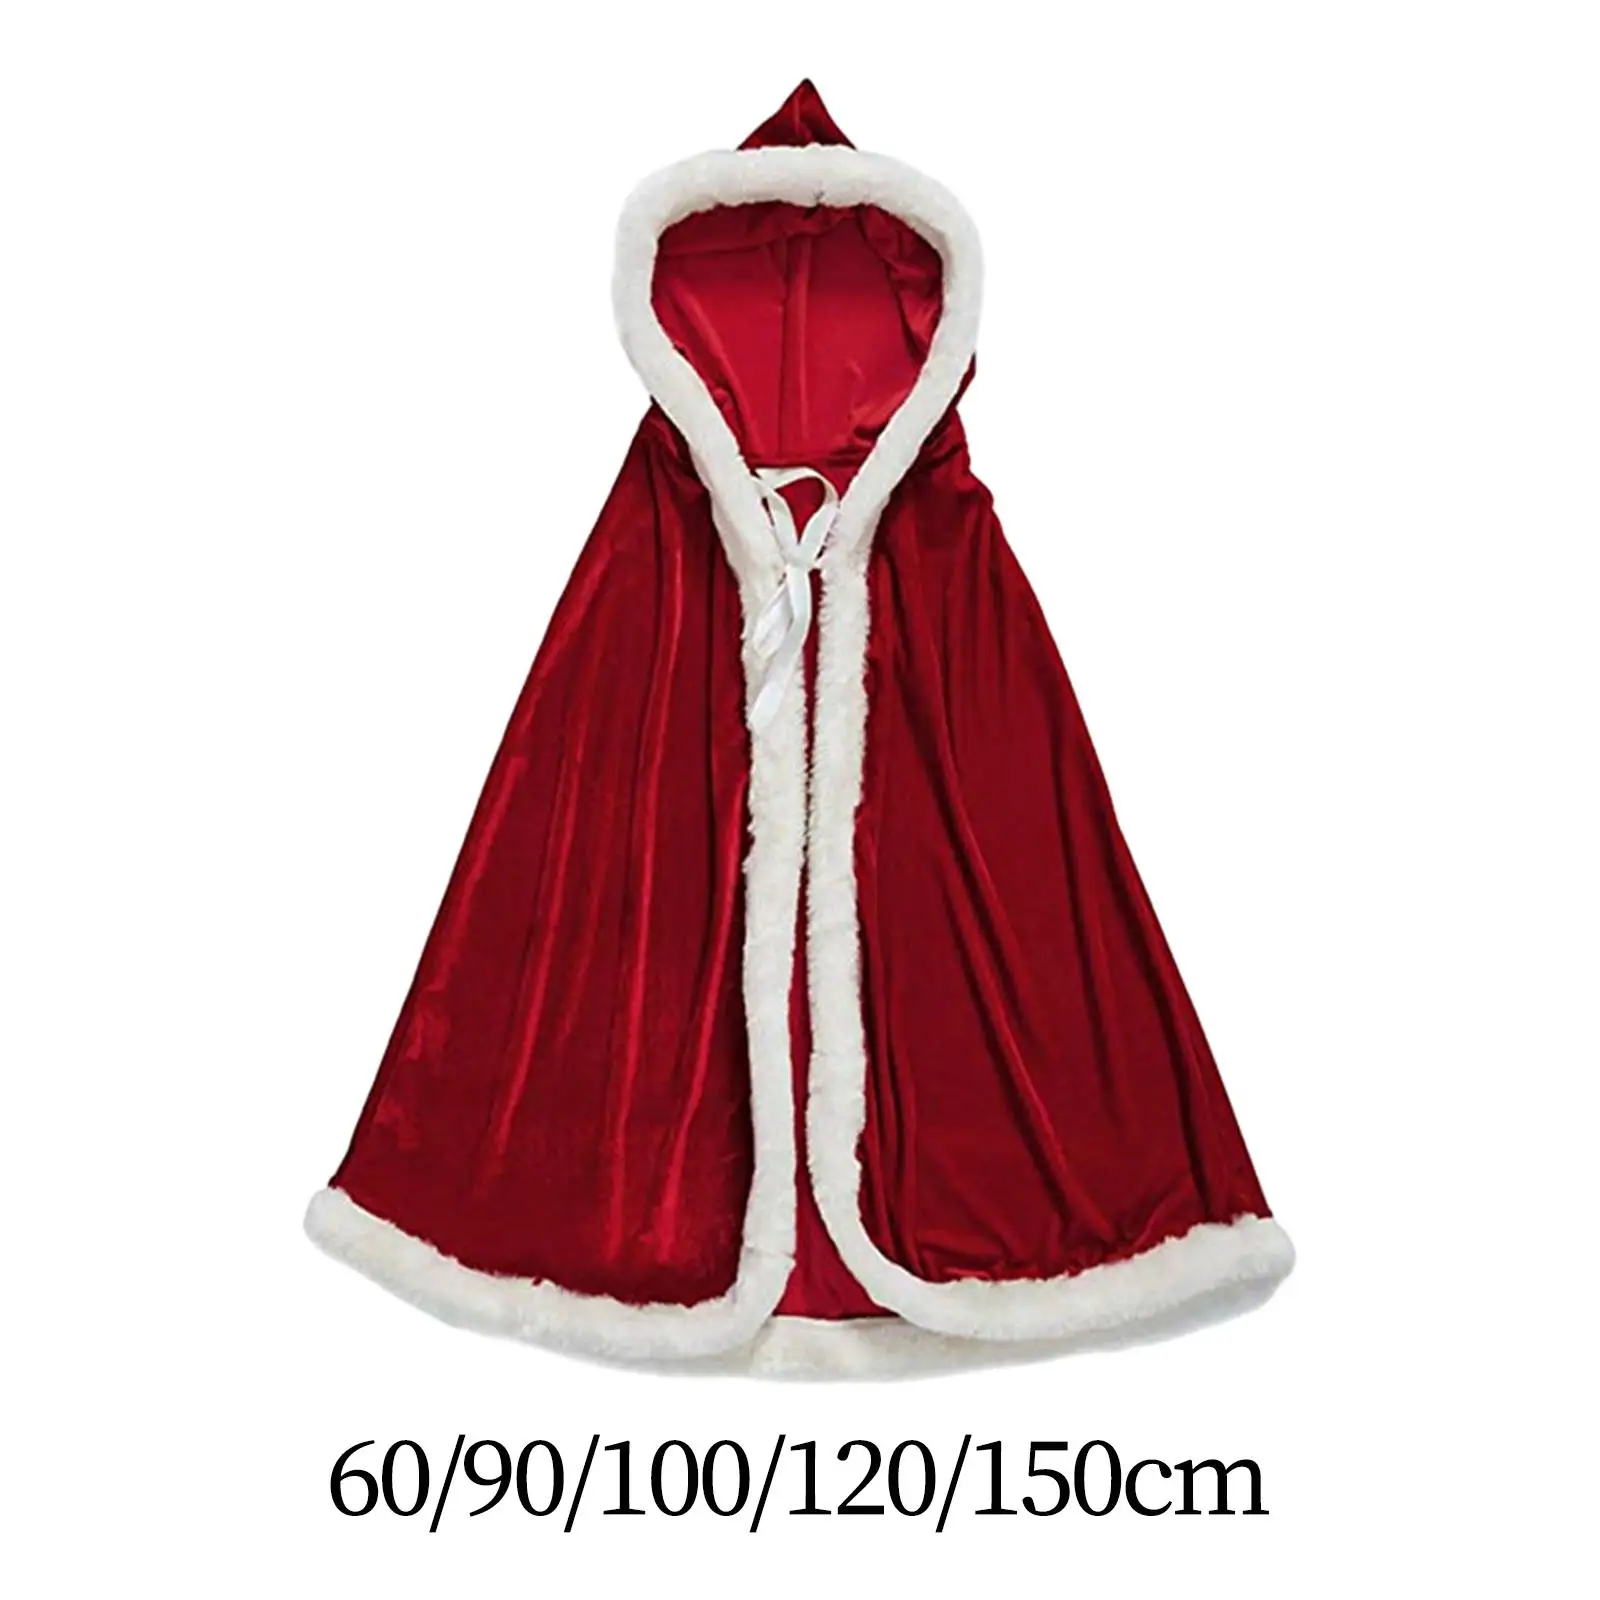 

Santa Claus Robe Comfortable Reusable Soft Santa Velvet Hooded Cape for Roles Play Cosplay Xmas Themed Party Dress up